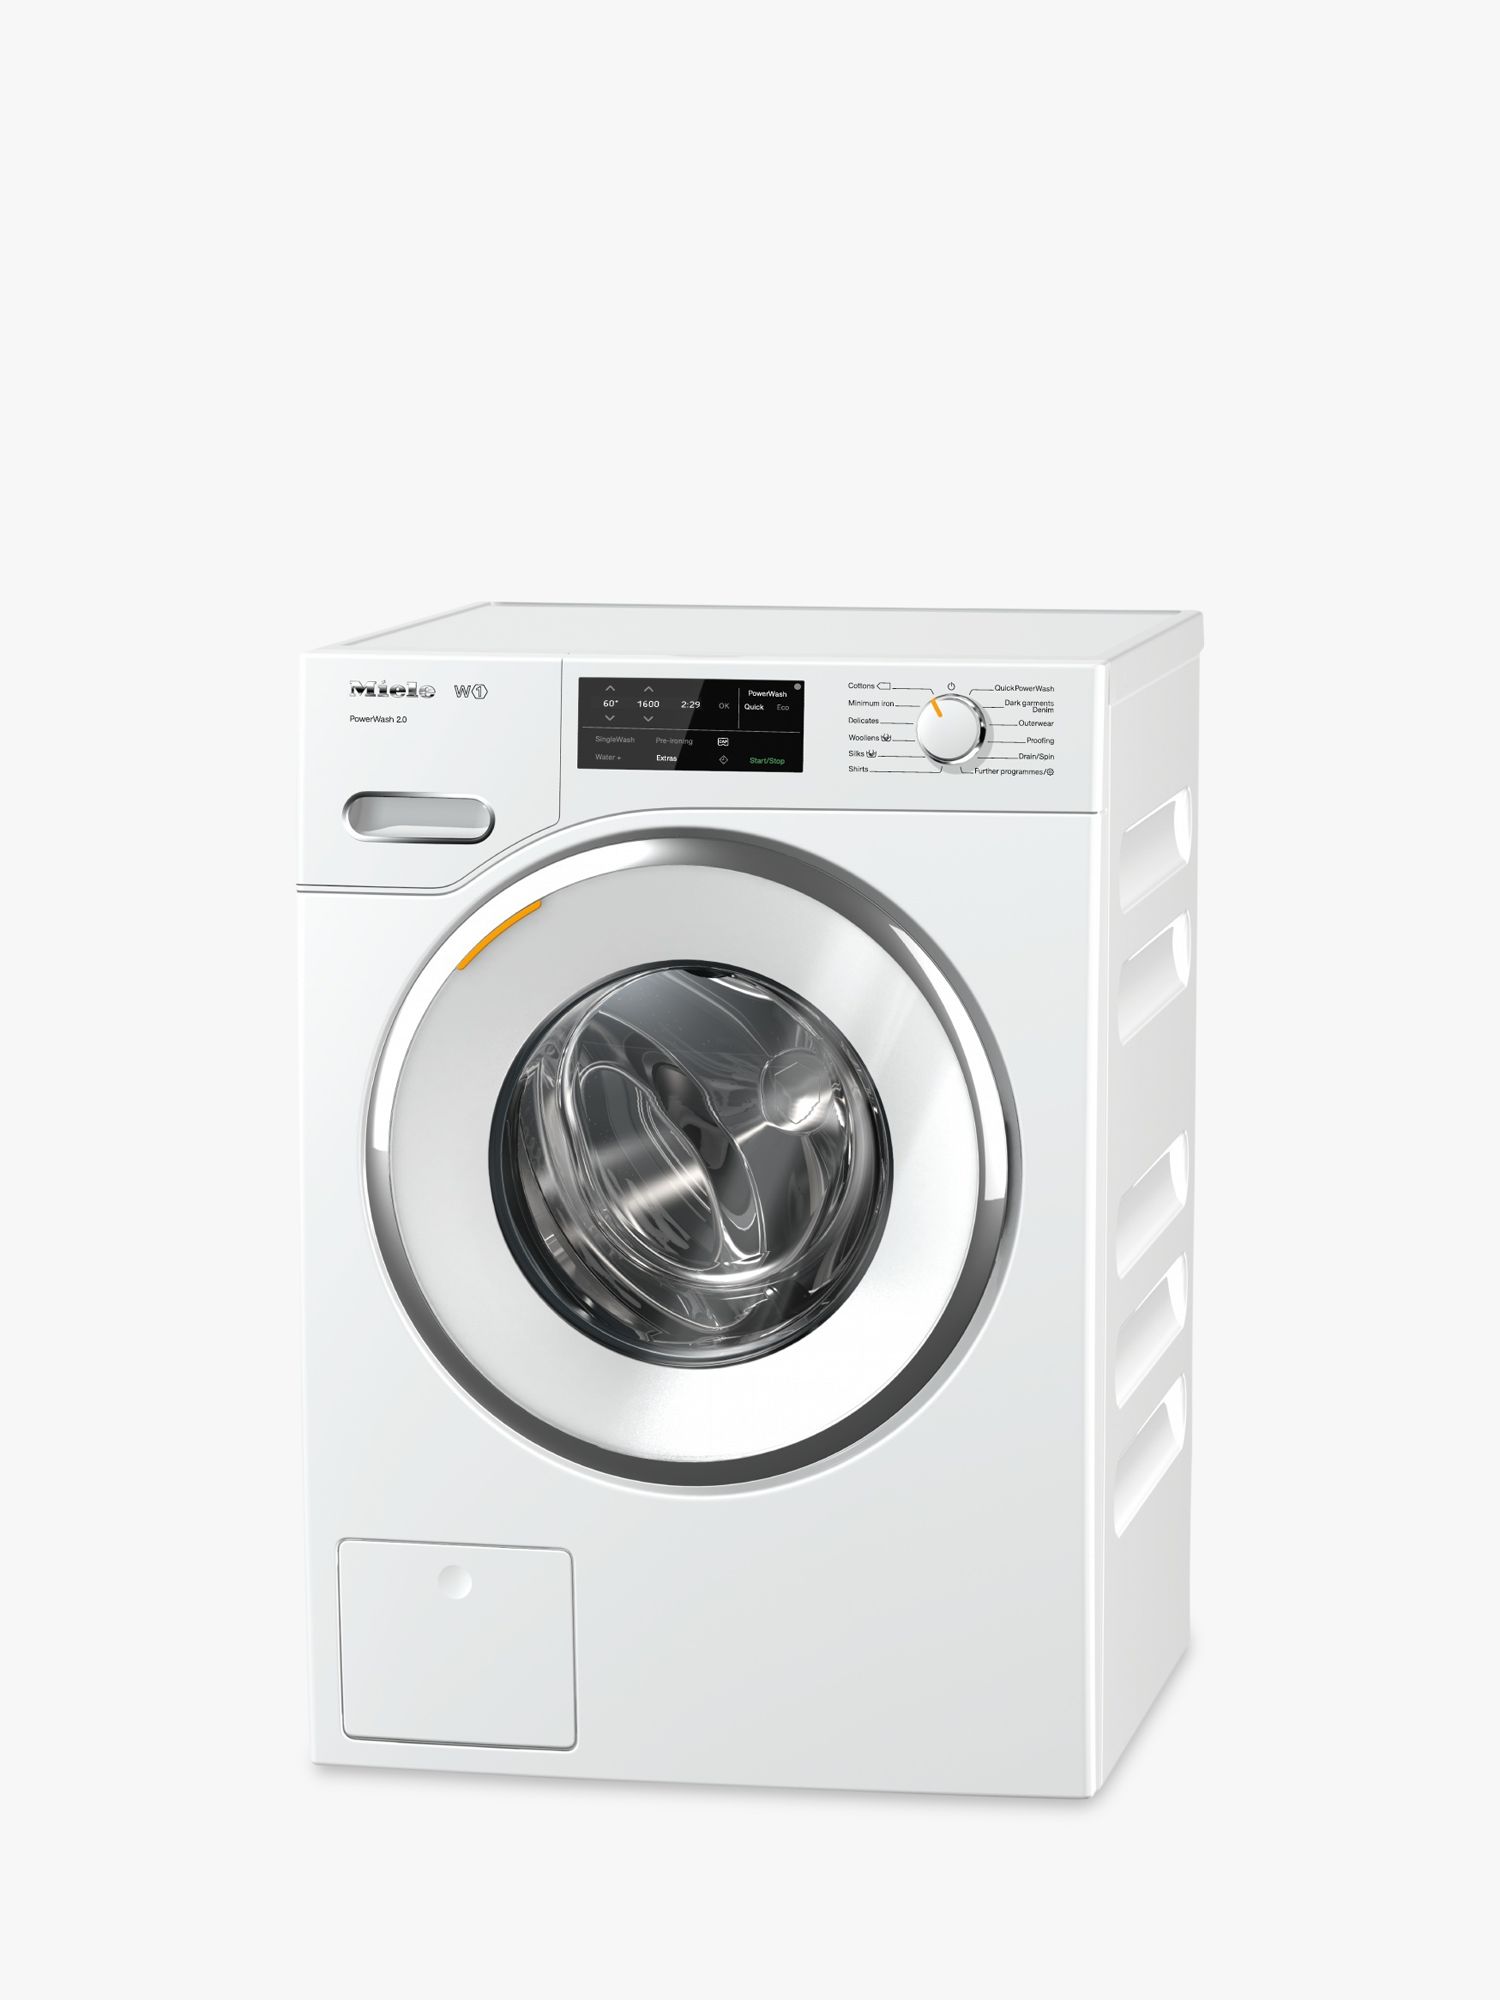 Miele WWE760 TwinDos Freestanding Washing Machine, 8kg Load, A+++ Energy Rating, 1400rpm Spin, White